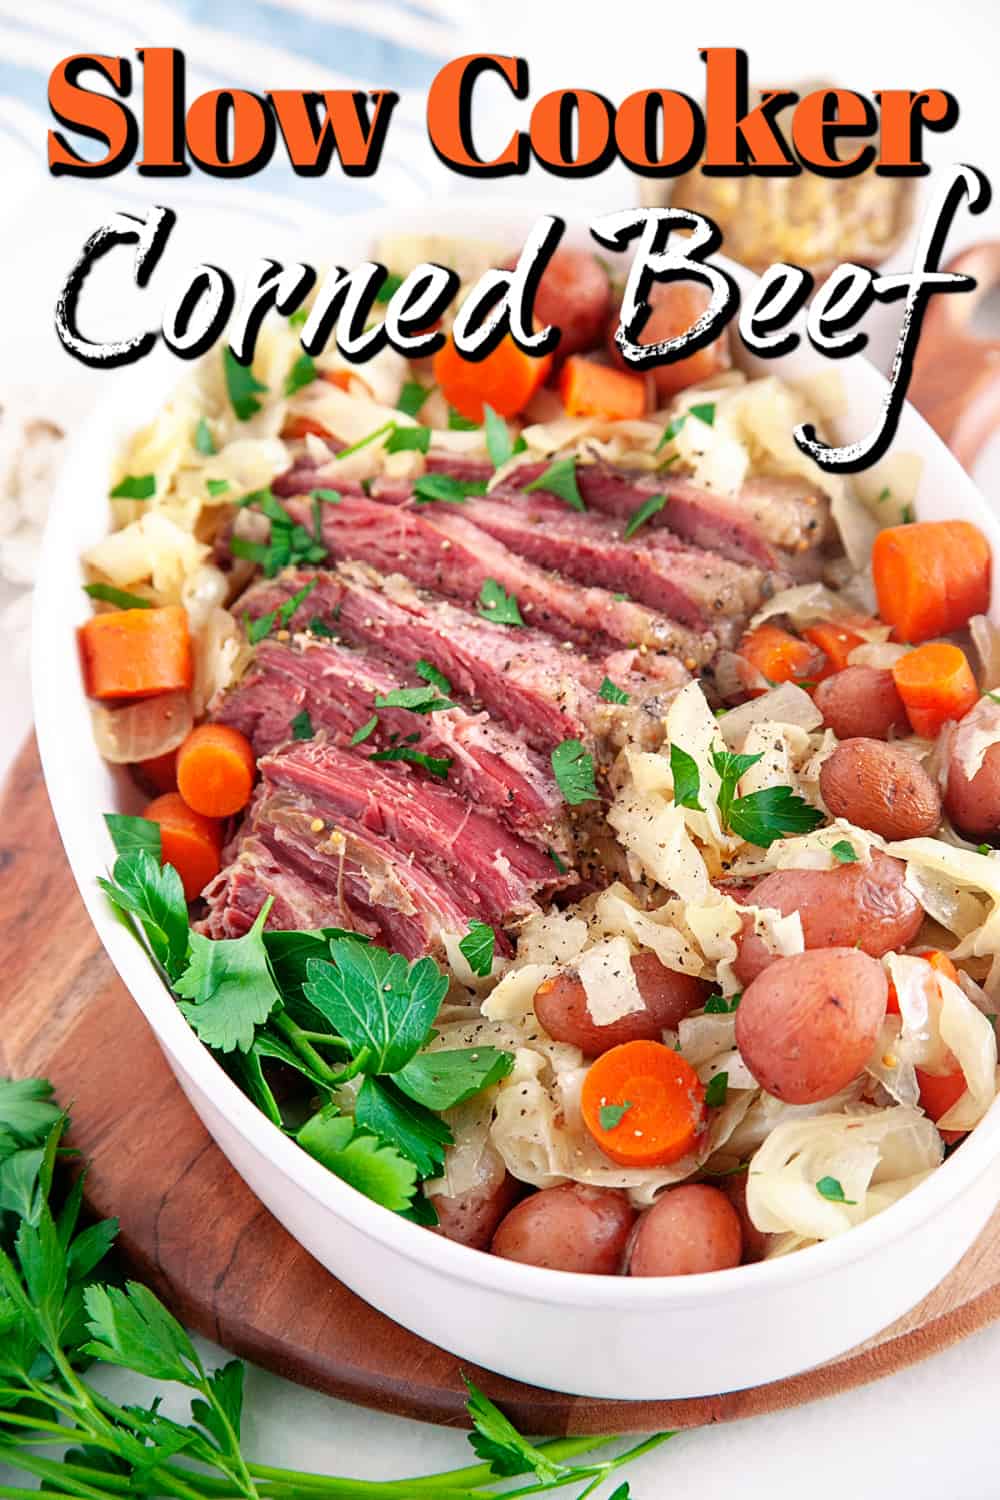 Corned Beef and Cabbage - Slow Cooker Pin.